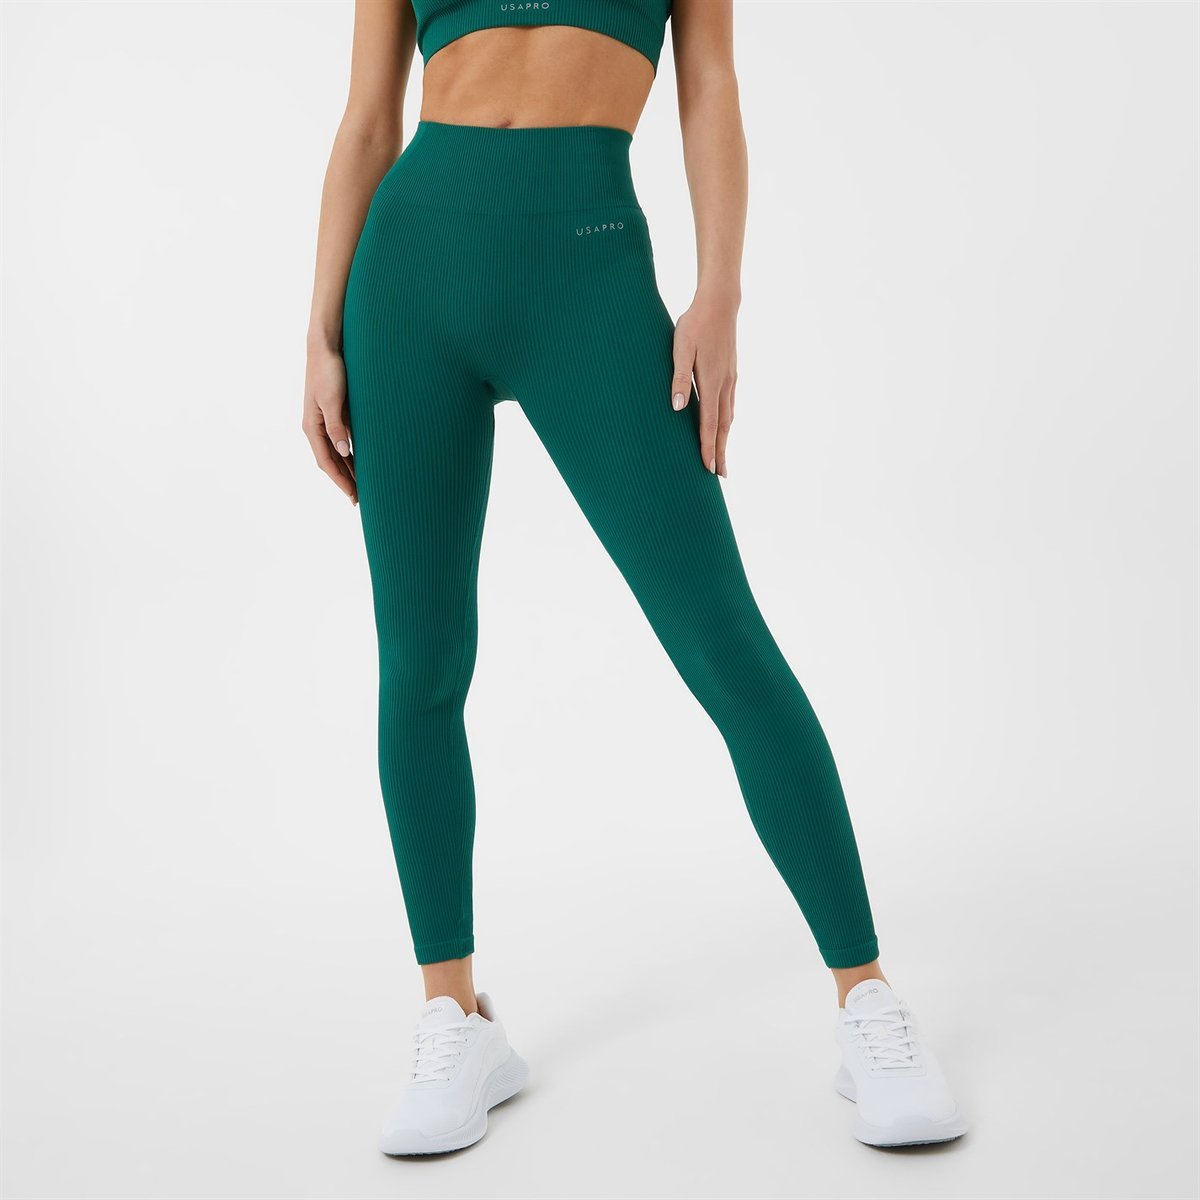 Freestyle Flat Front Forest Sustainable Legging | Emily Hsu Designs